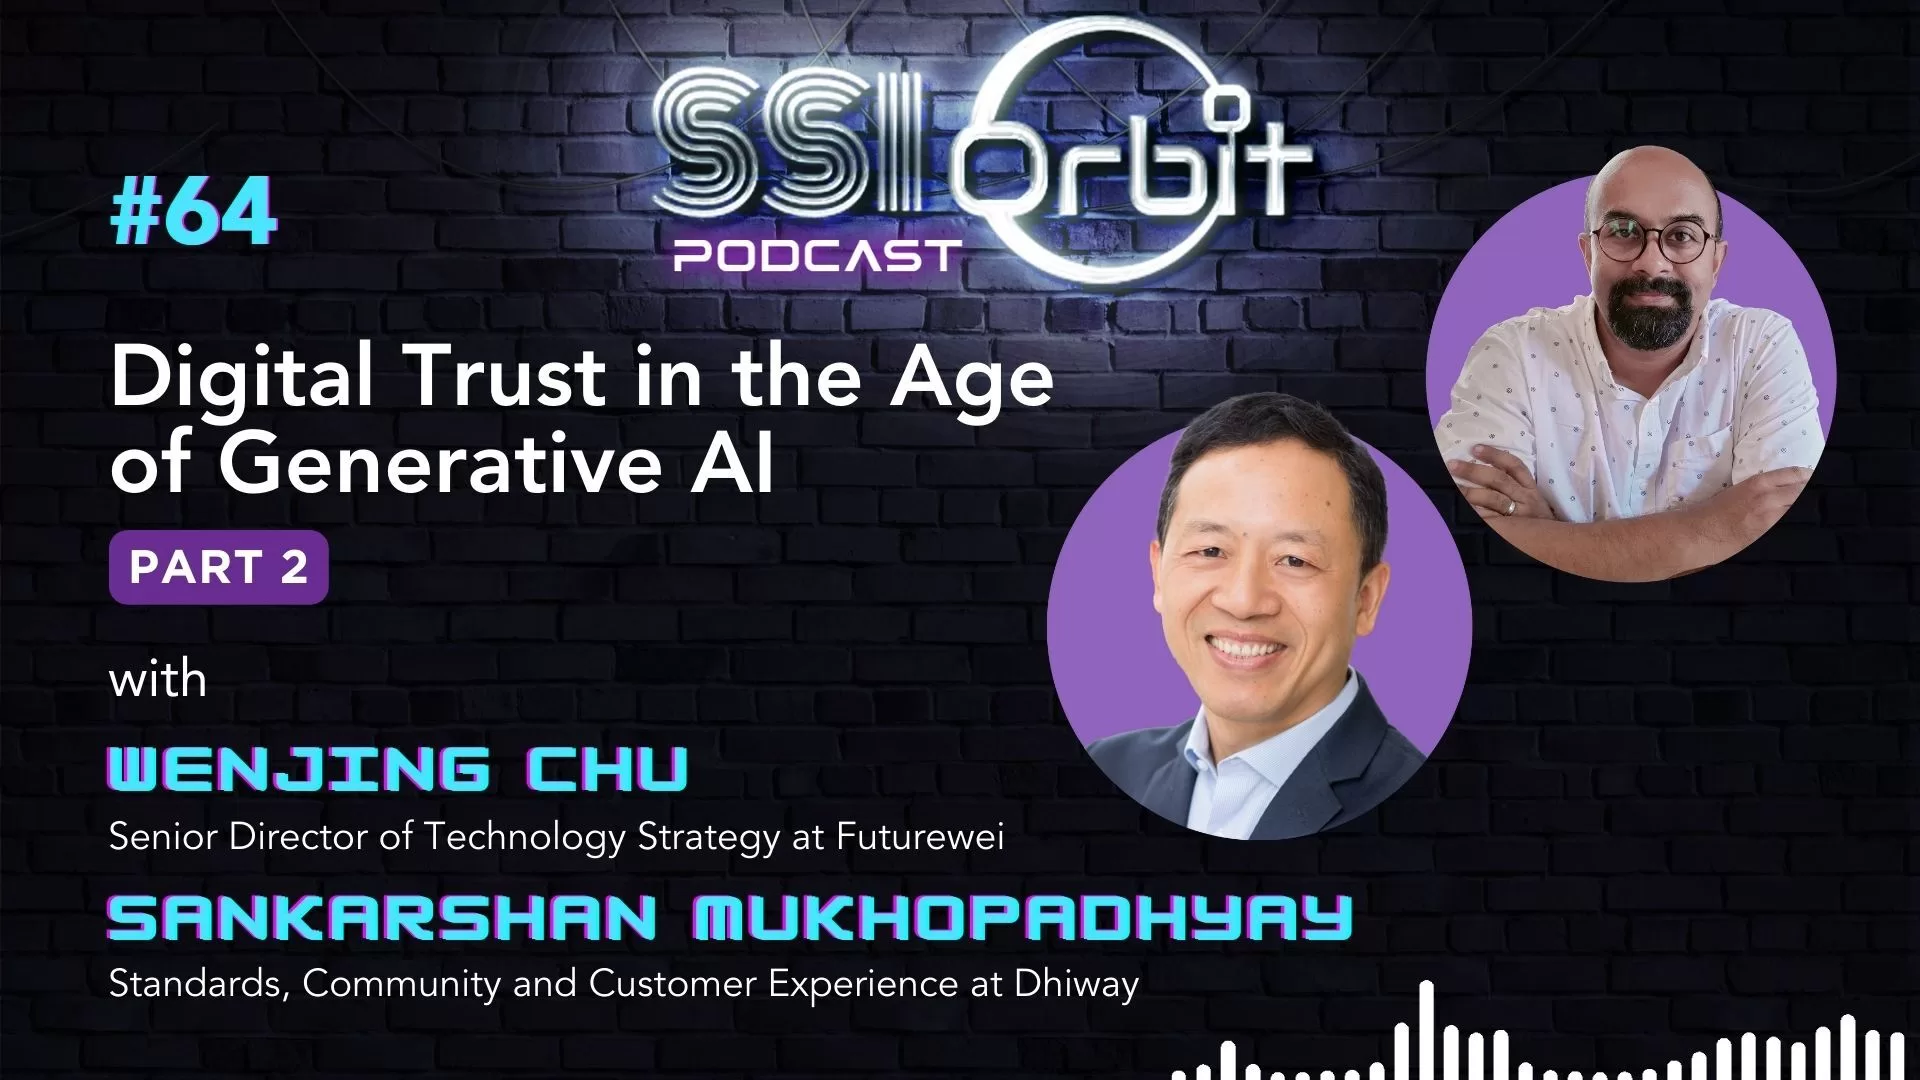 Digital Trust in the Age of Generative AI – Part 2  (with Wenjing Chu & Sankarshan Mukhopadhyay)